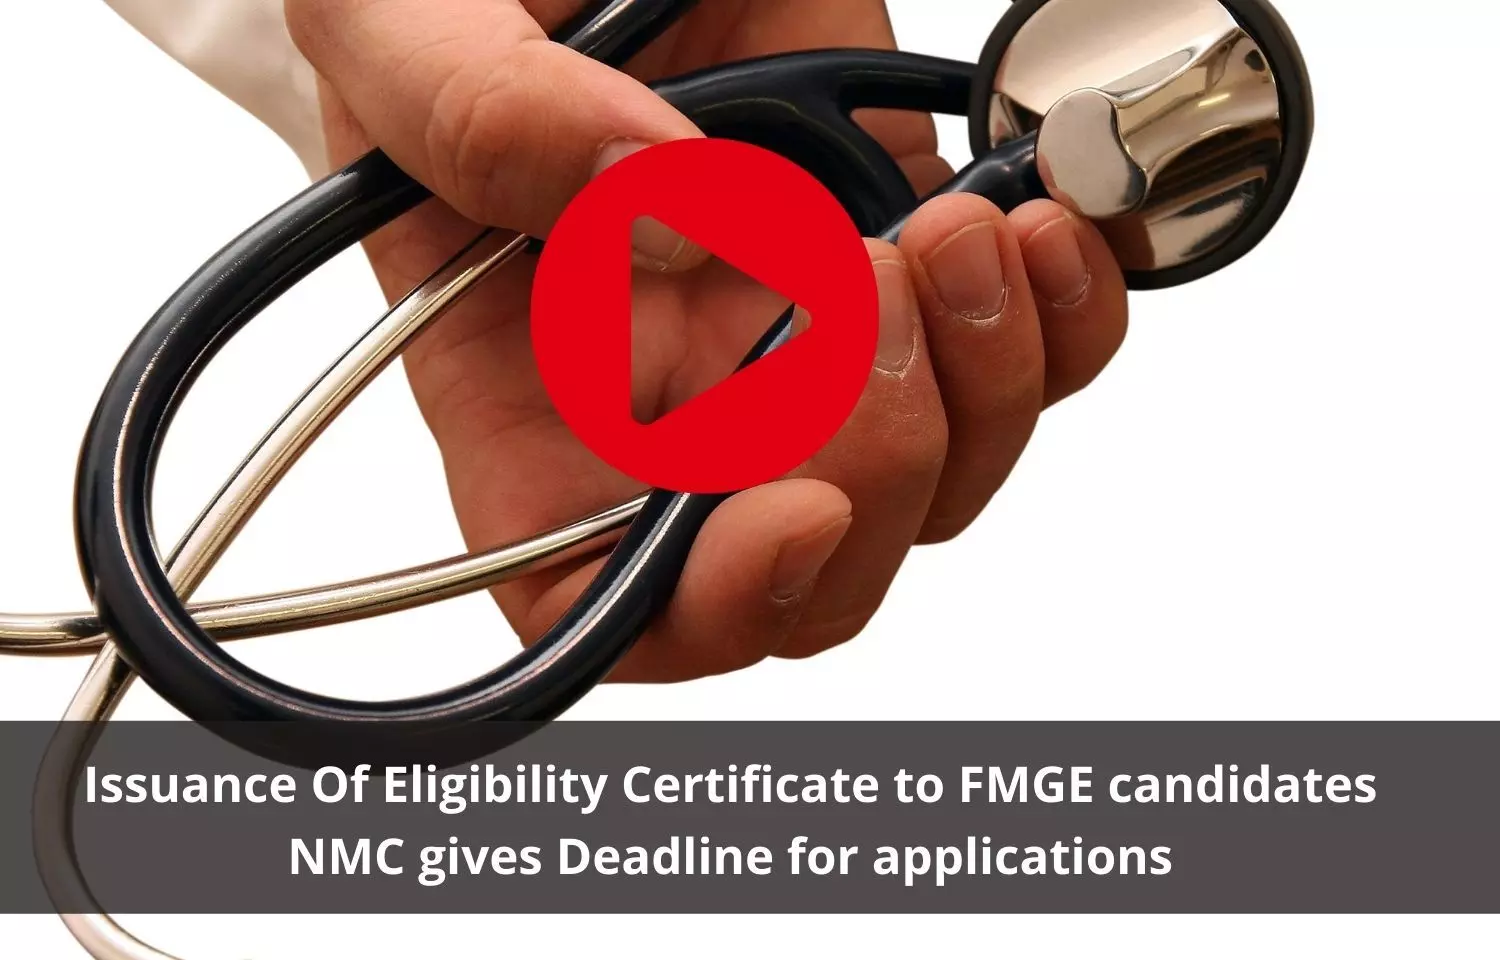 Issuance Of eligibility certificate to FMGE candidates: NMC gives deadline for applications